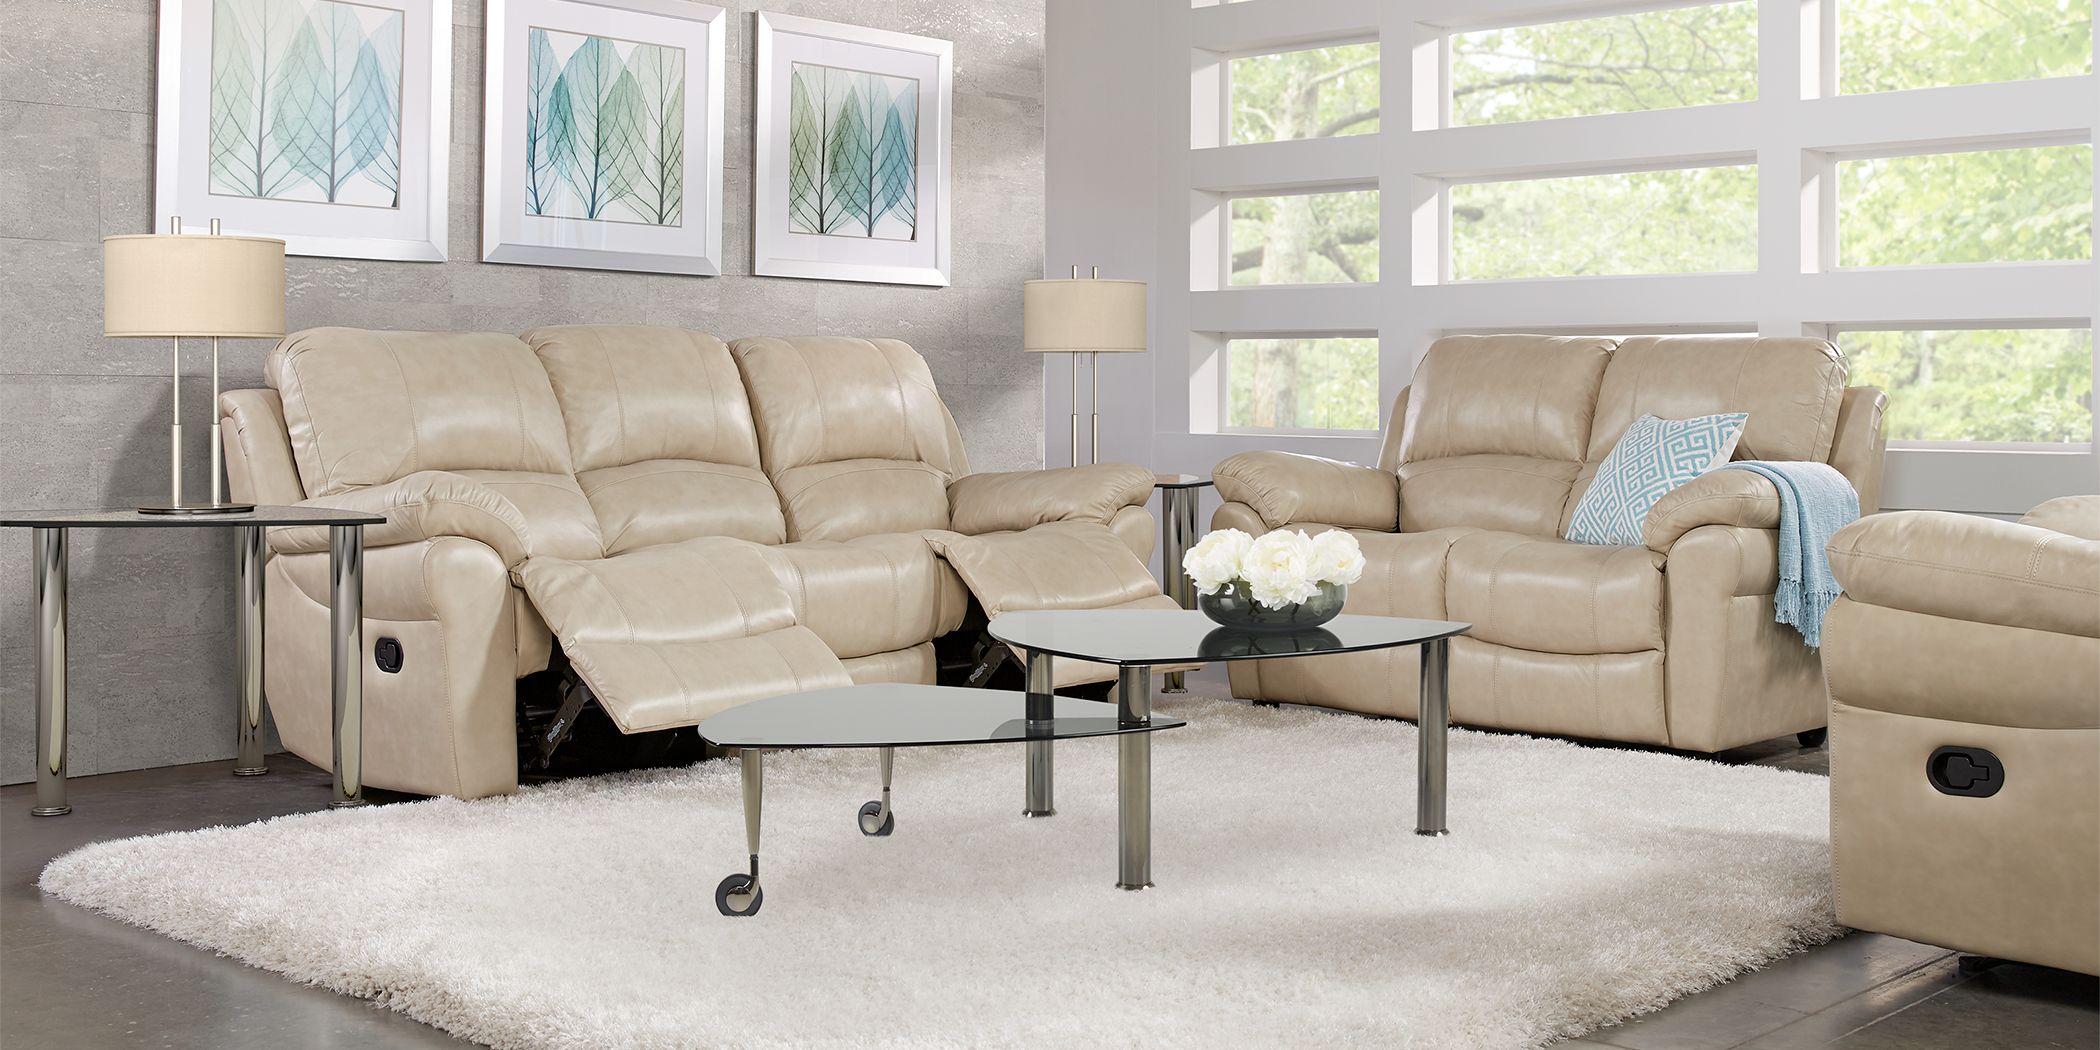 best family friendly couches